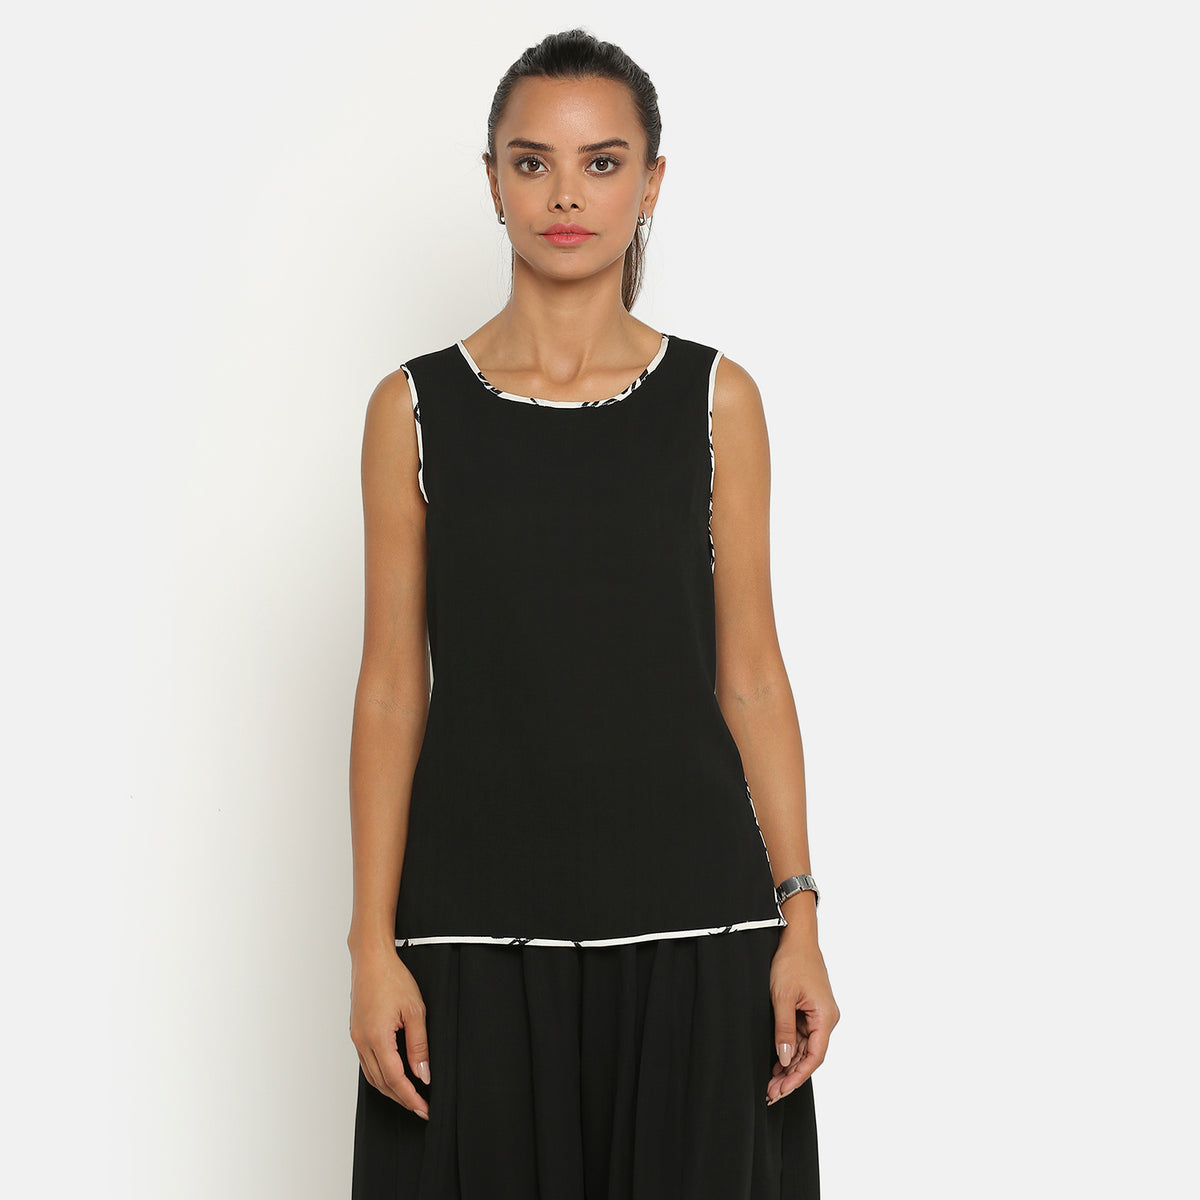 Black sleeveless top with contrast piping